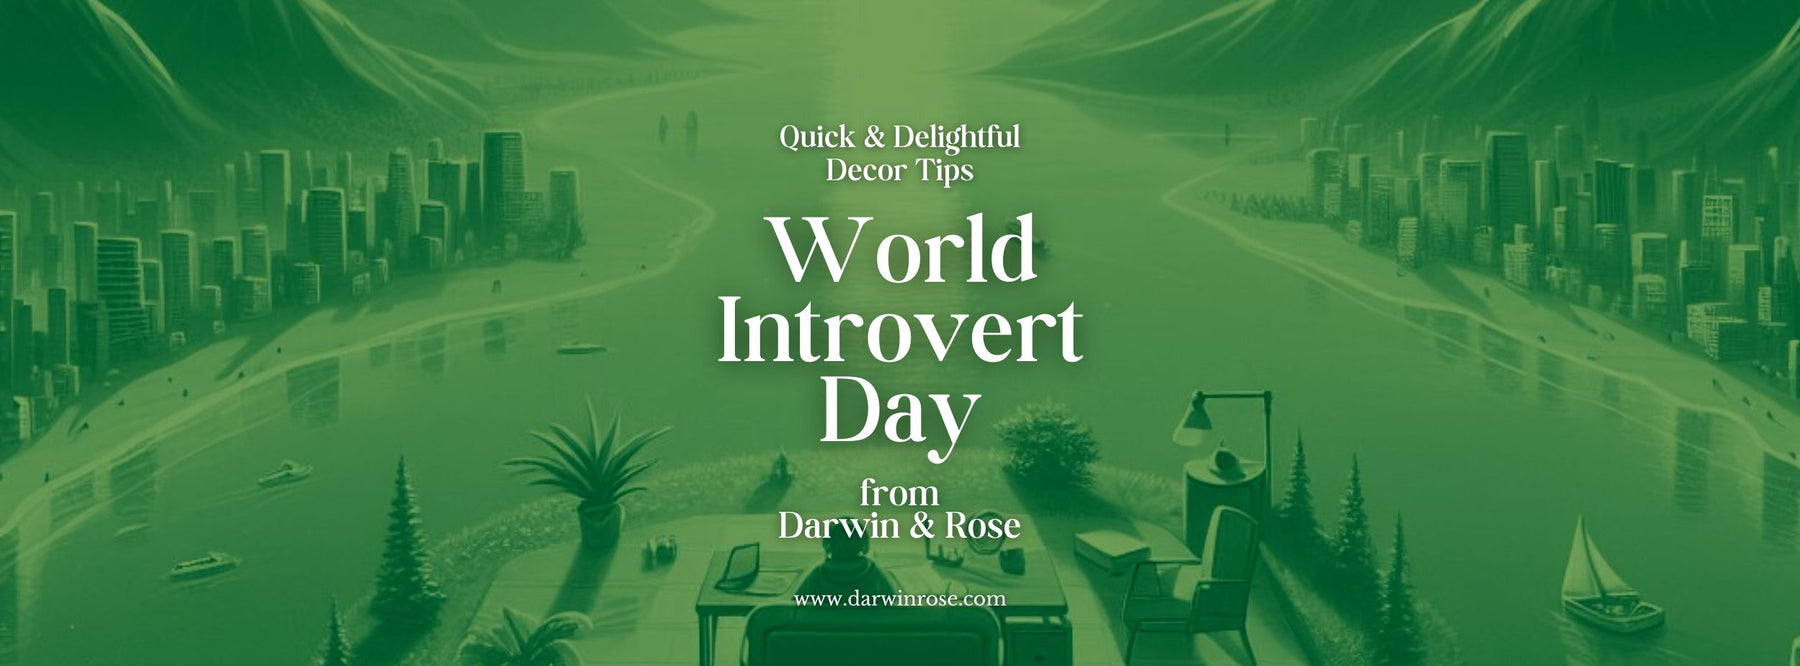 World Introvert Day: Quick & Delightful Decor Tips from Darwin & Rose